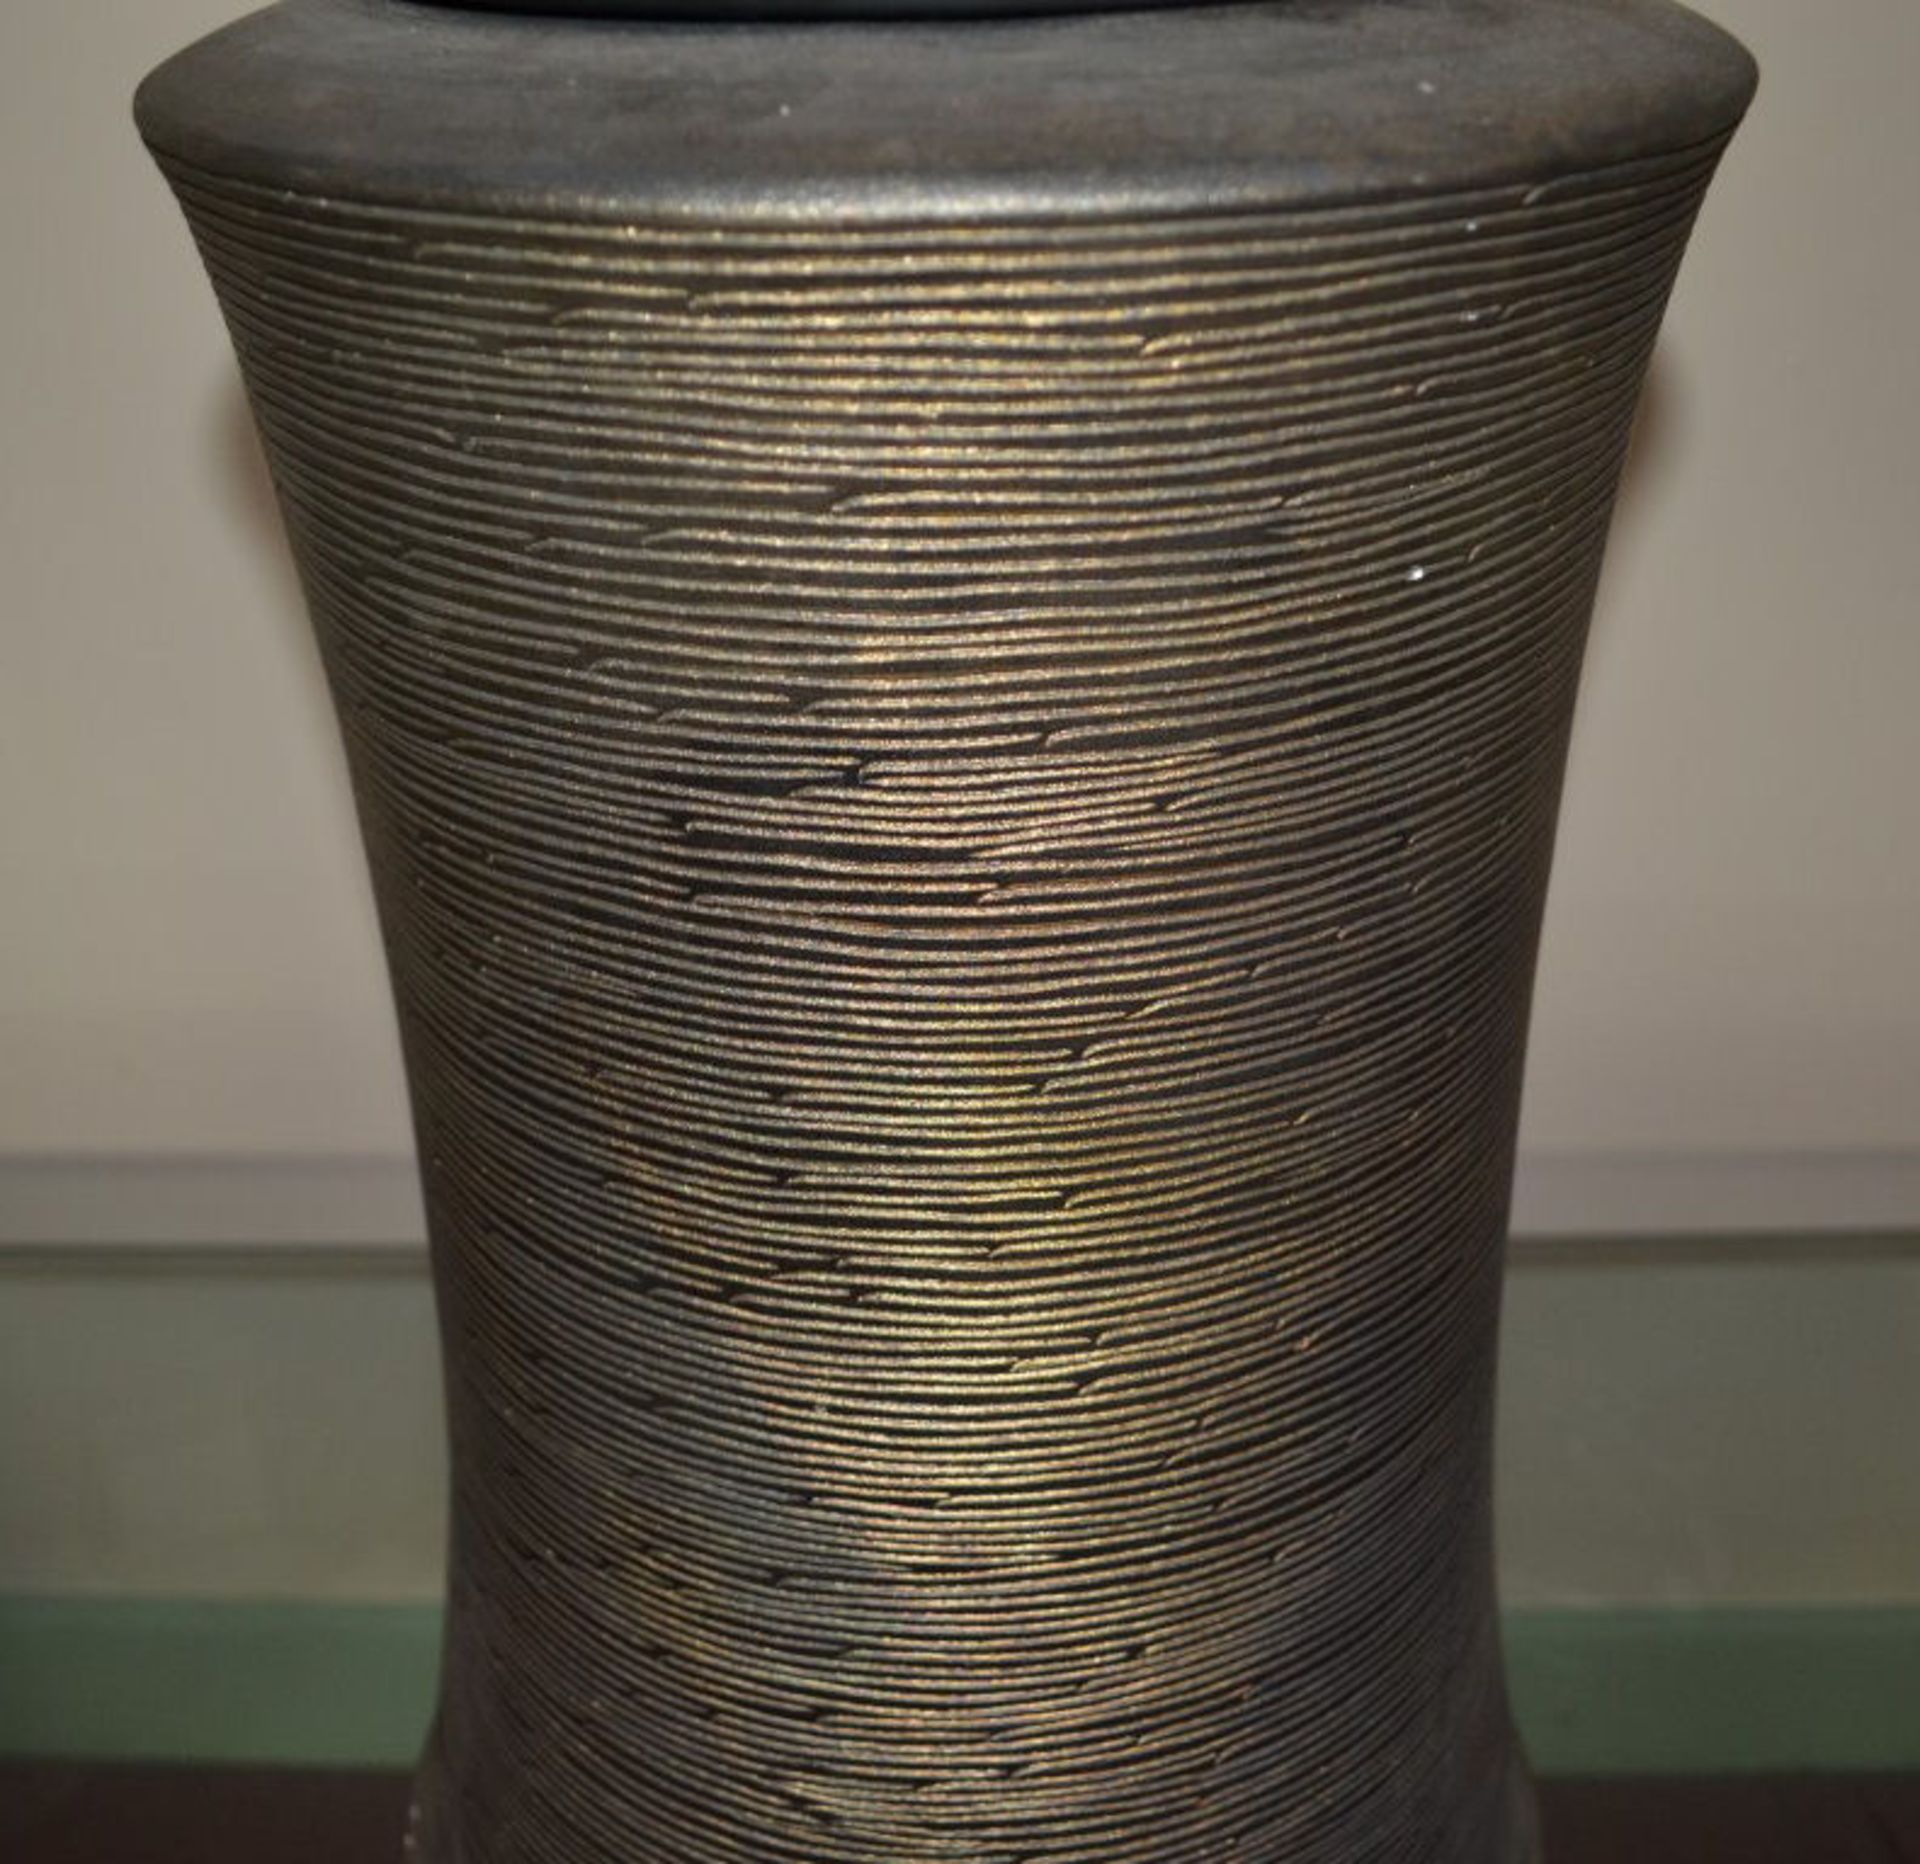 1 x Large Metal Urn In Bronze/Copper Colour. 53cm Tall. 28cm Diameter At Top And 31cm At Bottom. - Image 3 of 4